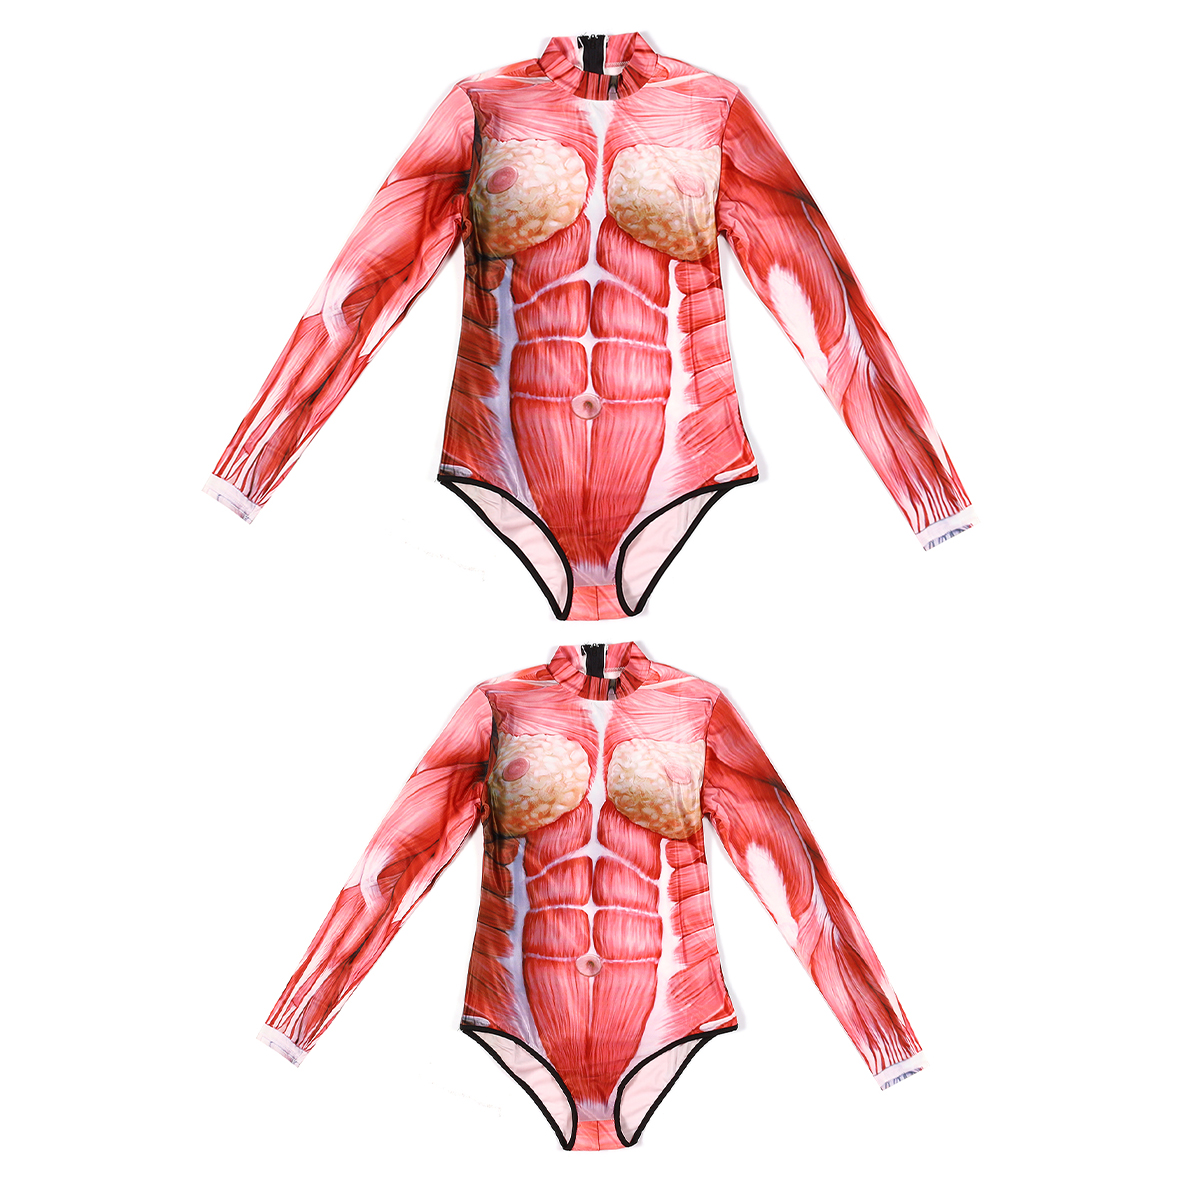 Womens-Human-Organs-Swimwear-Cosplay-Costume-Swimsuit-Bathing-Suit-Party-Clothes-1623848-7